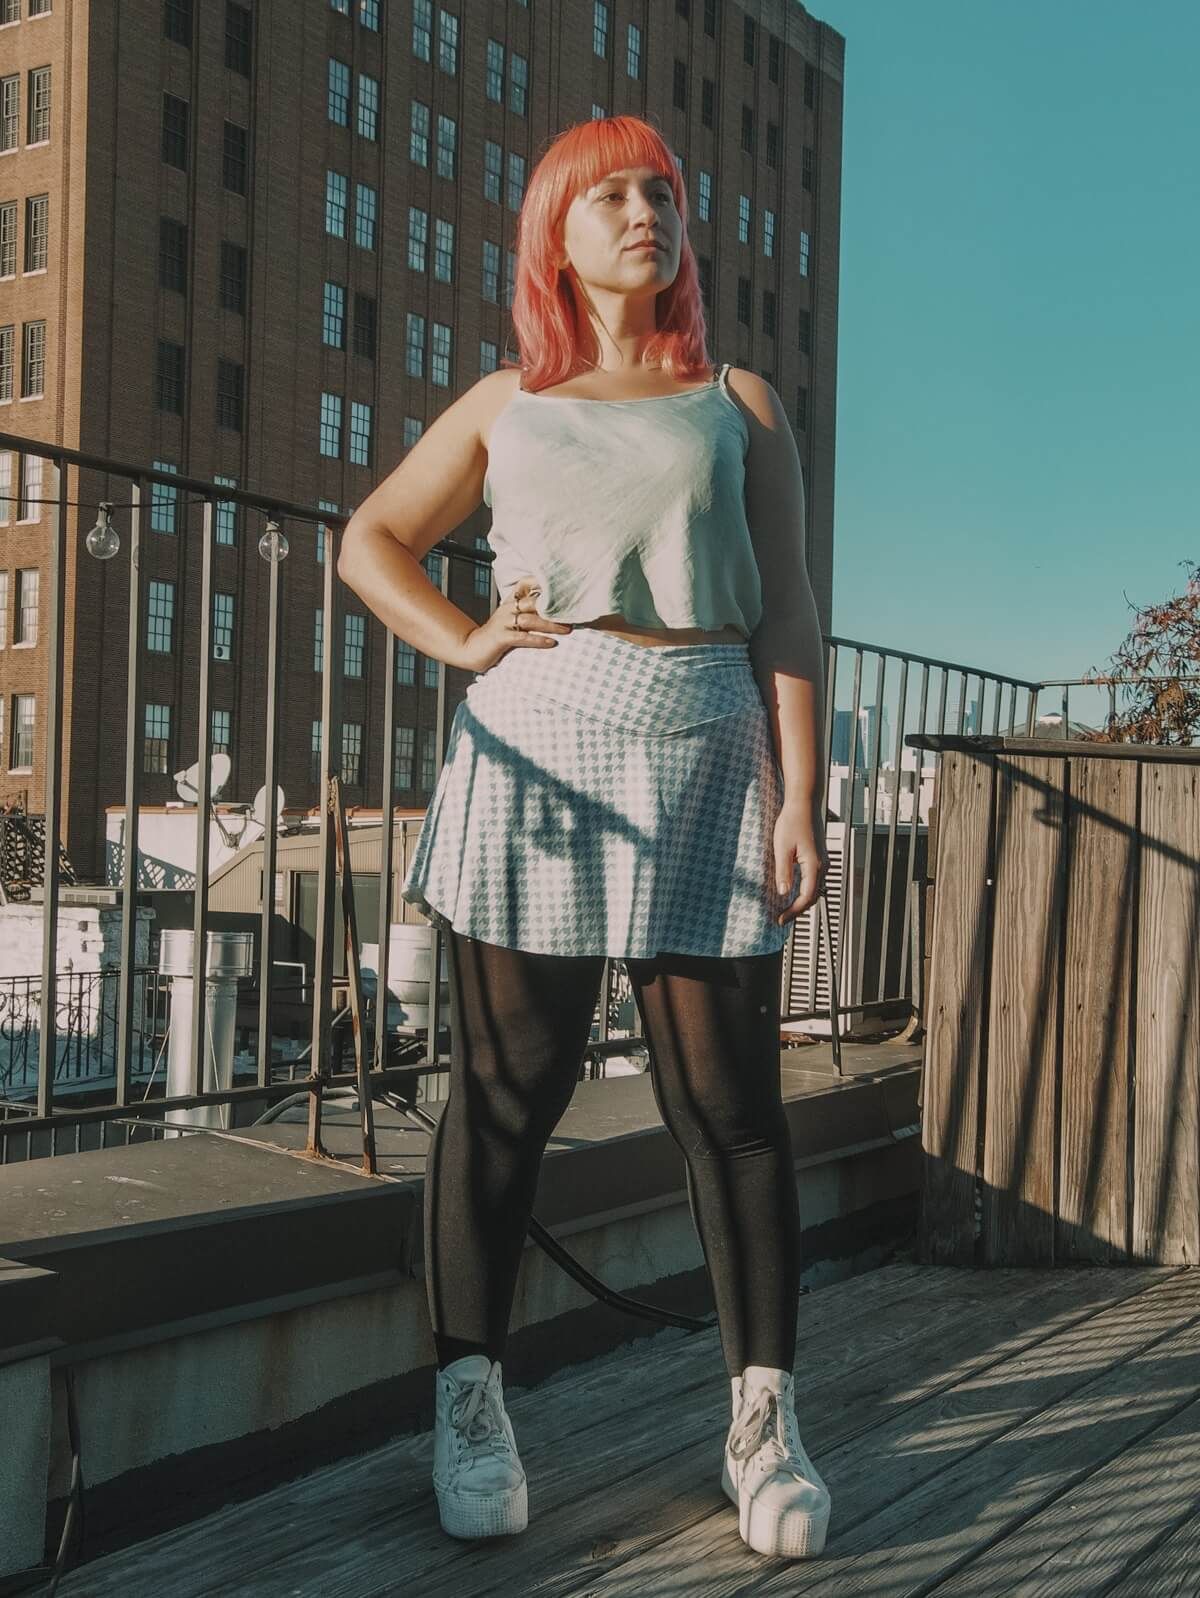 A pink haired woman wearing a blue tank top and a checkered blue and white skirt, stands on a rooftop against a clear blue sky, with a hand on her hip.